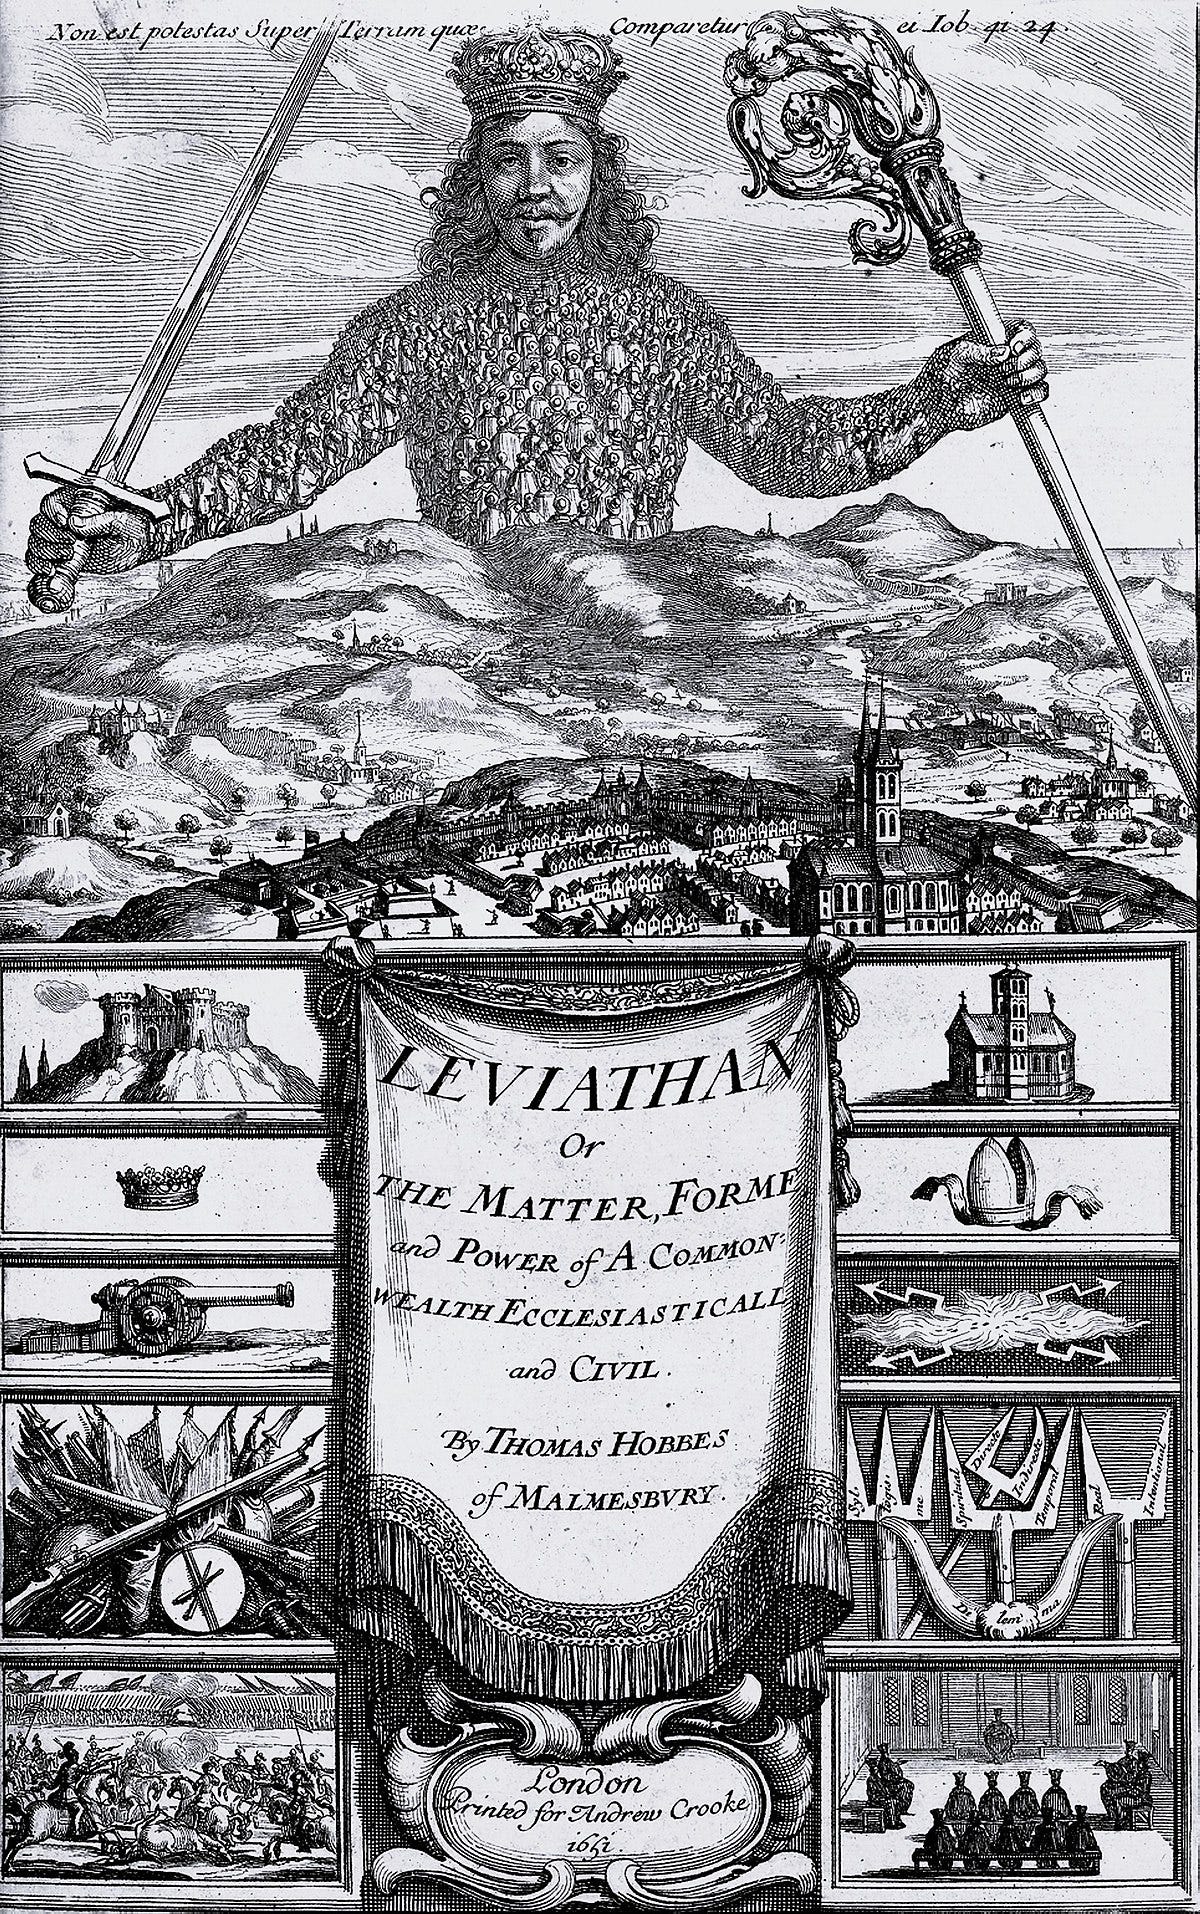 https://upload.wikimedia.org/wikipedia/commons/thumb/a/a1/Leviathan_by_Thomas_Hobbes.jpg/1200px-Leviathan_by_Thomas_Hobbes.jpg